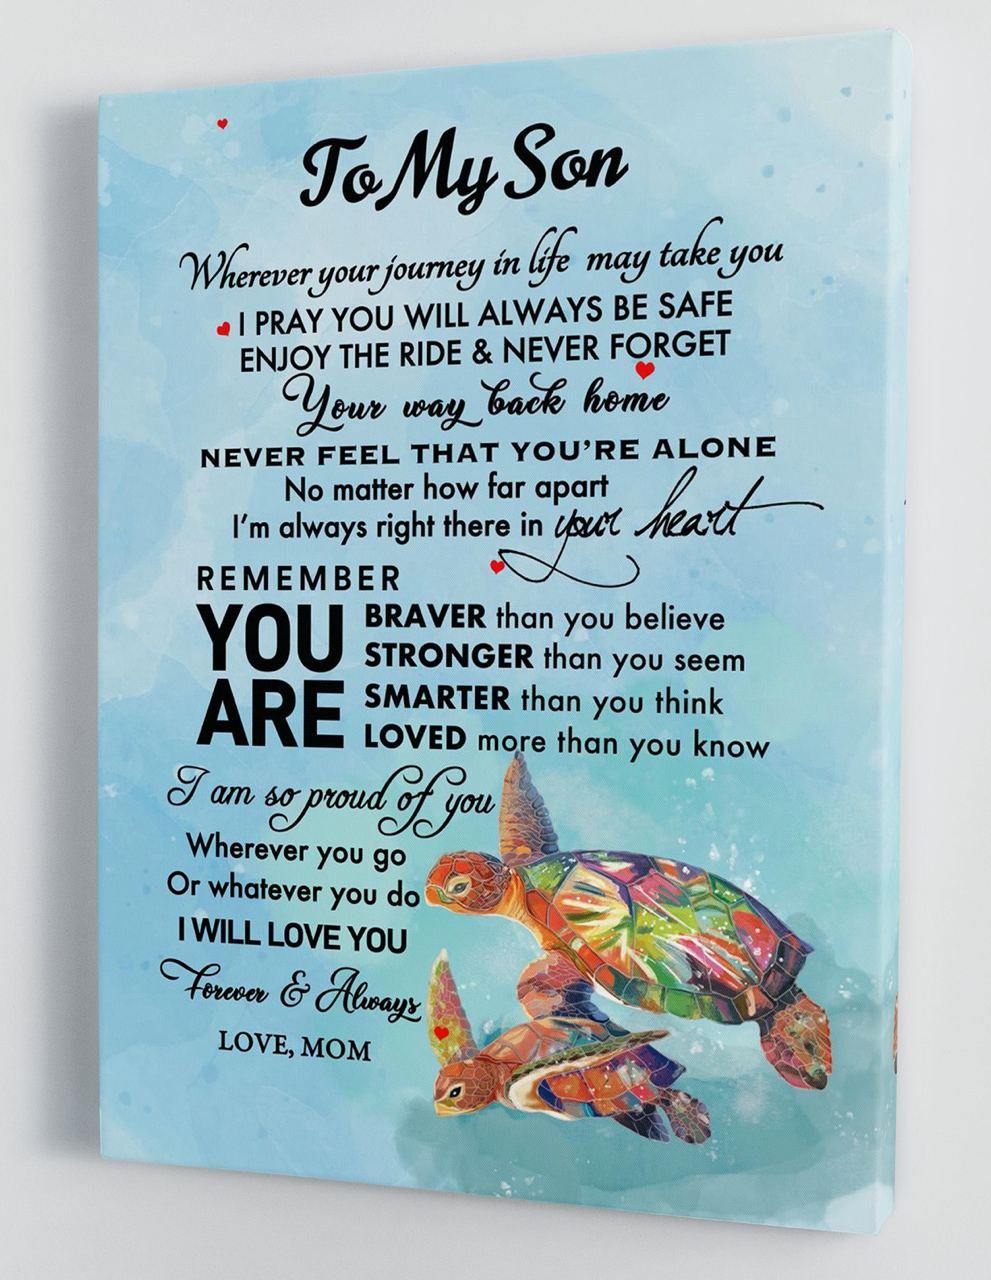 To My Son - From Mom - Framed Canvas Gift MS048 - DivesArt LLC